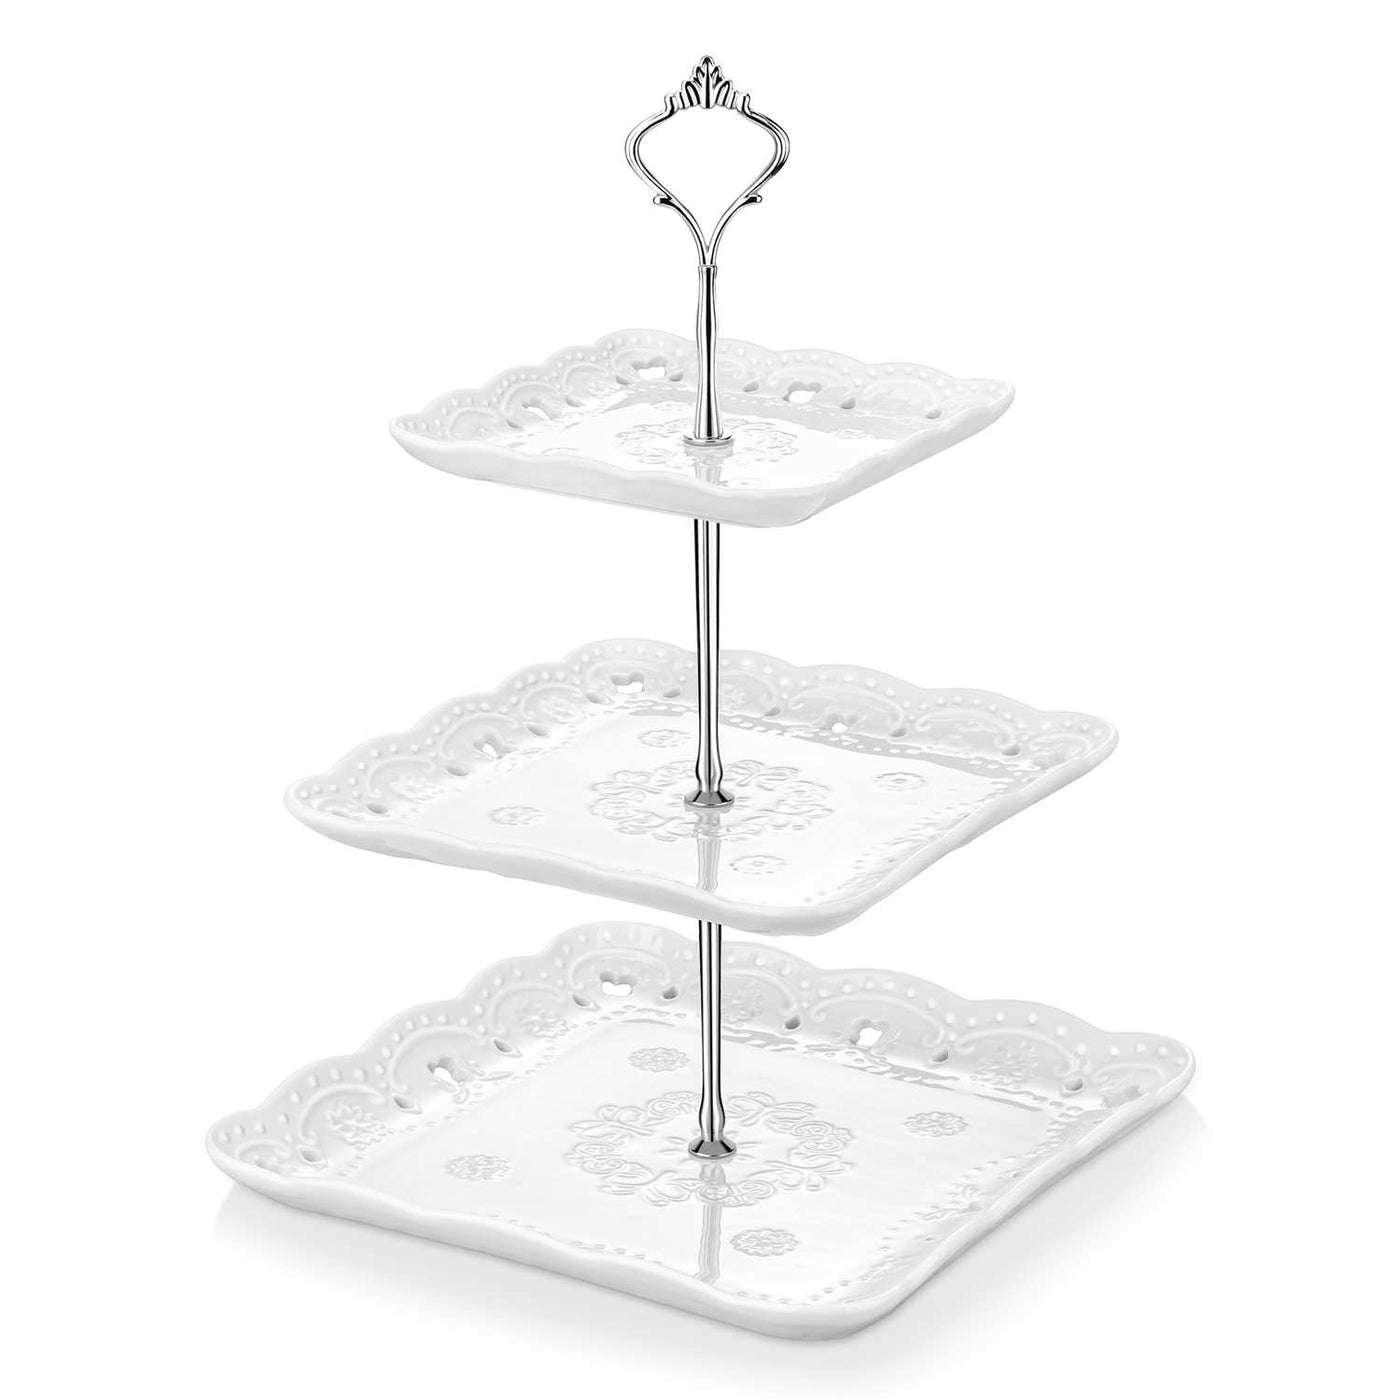 18″ Square Cake Stand | Harry's Party Rental